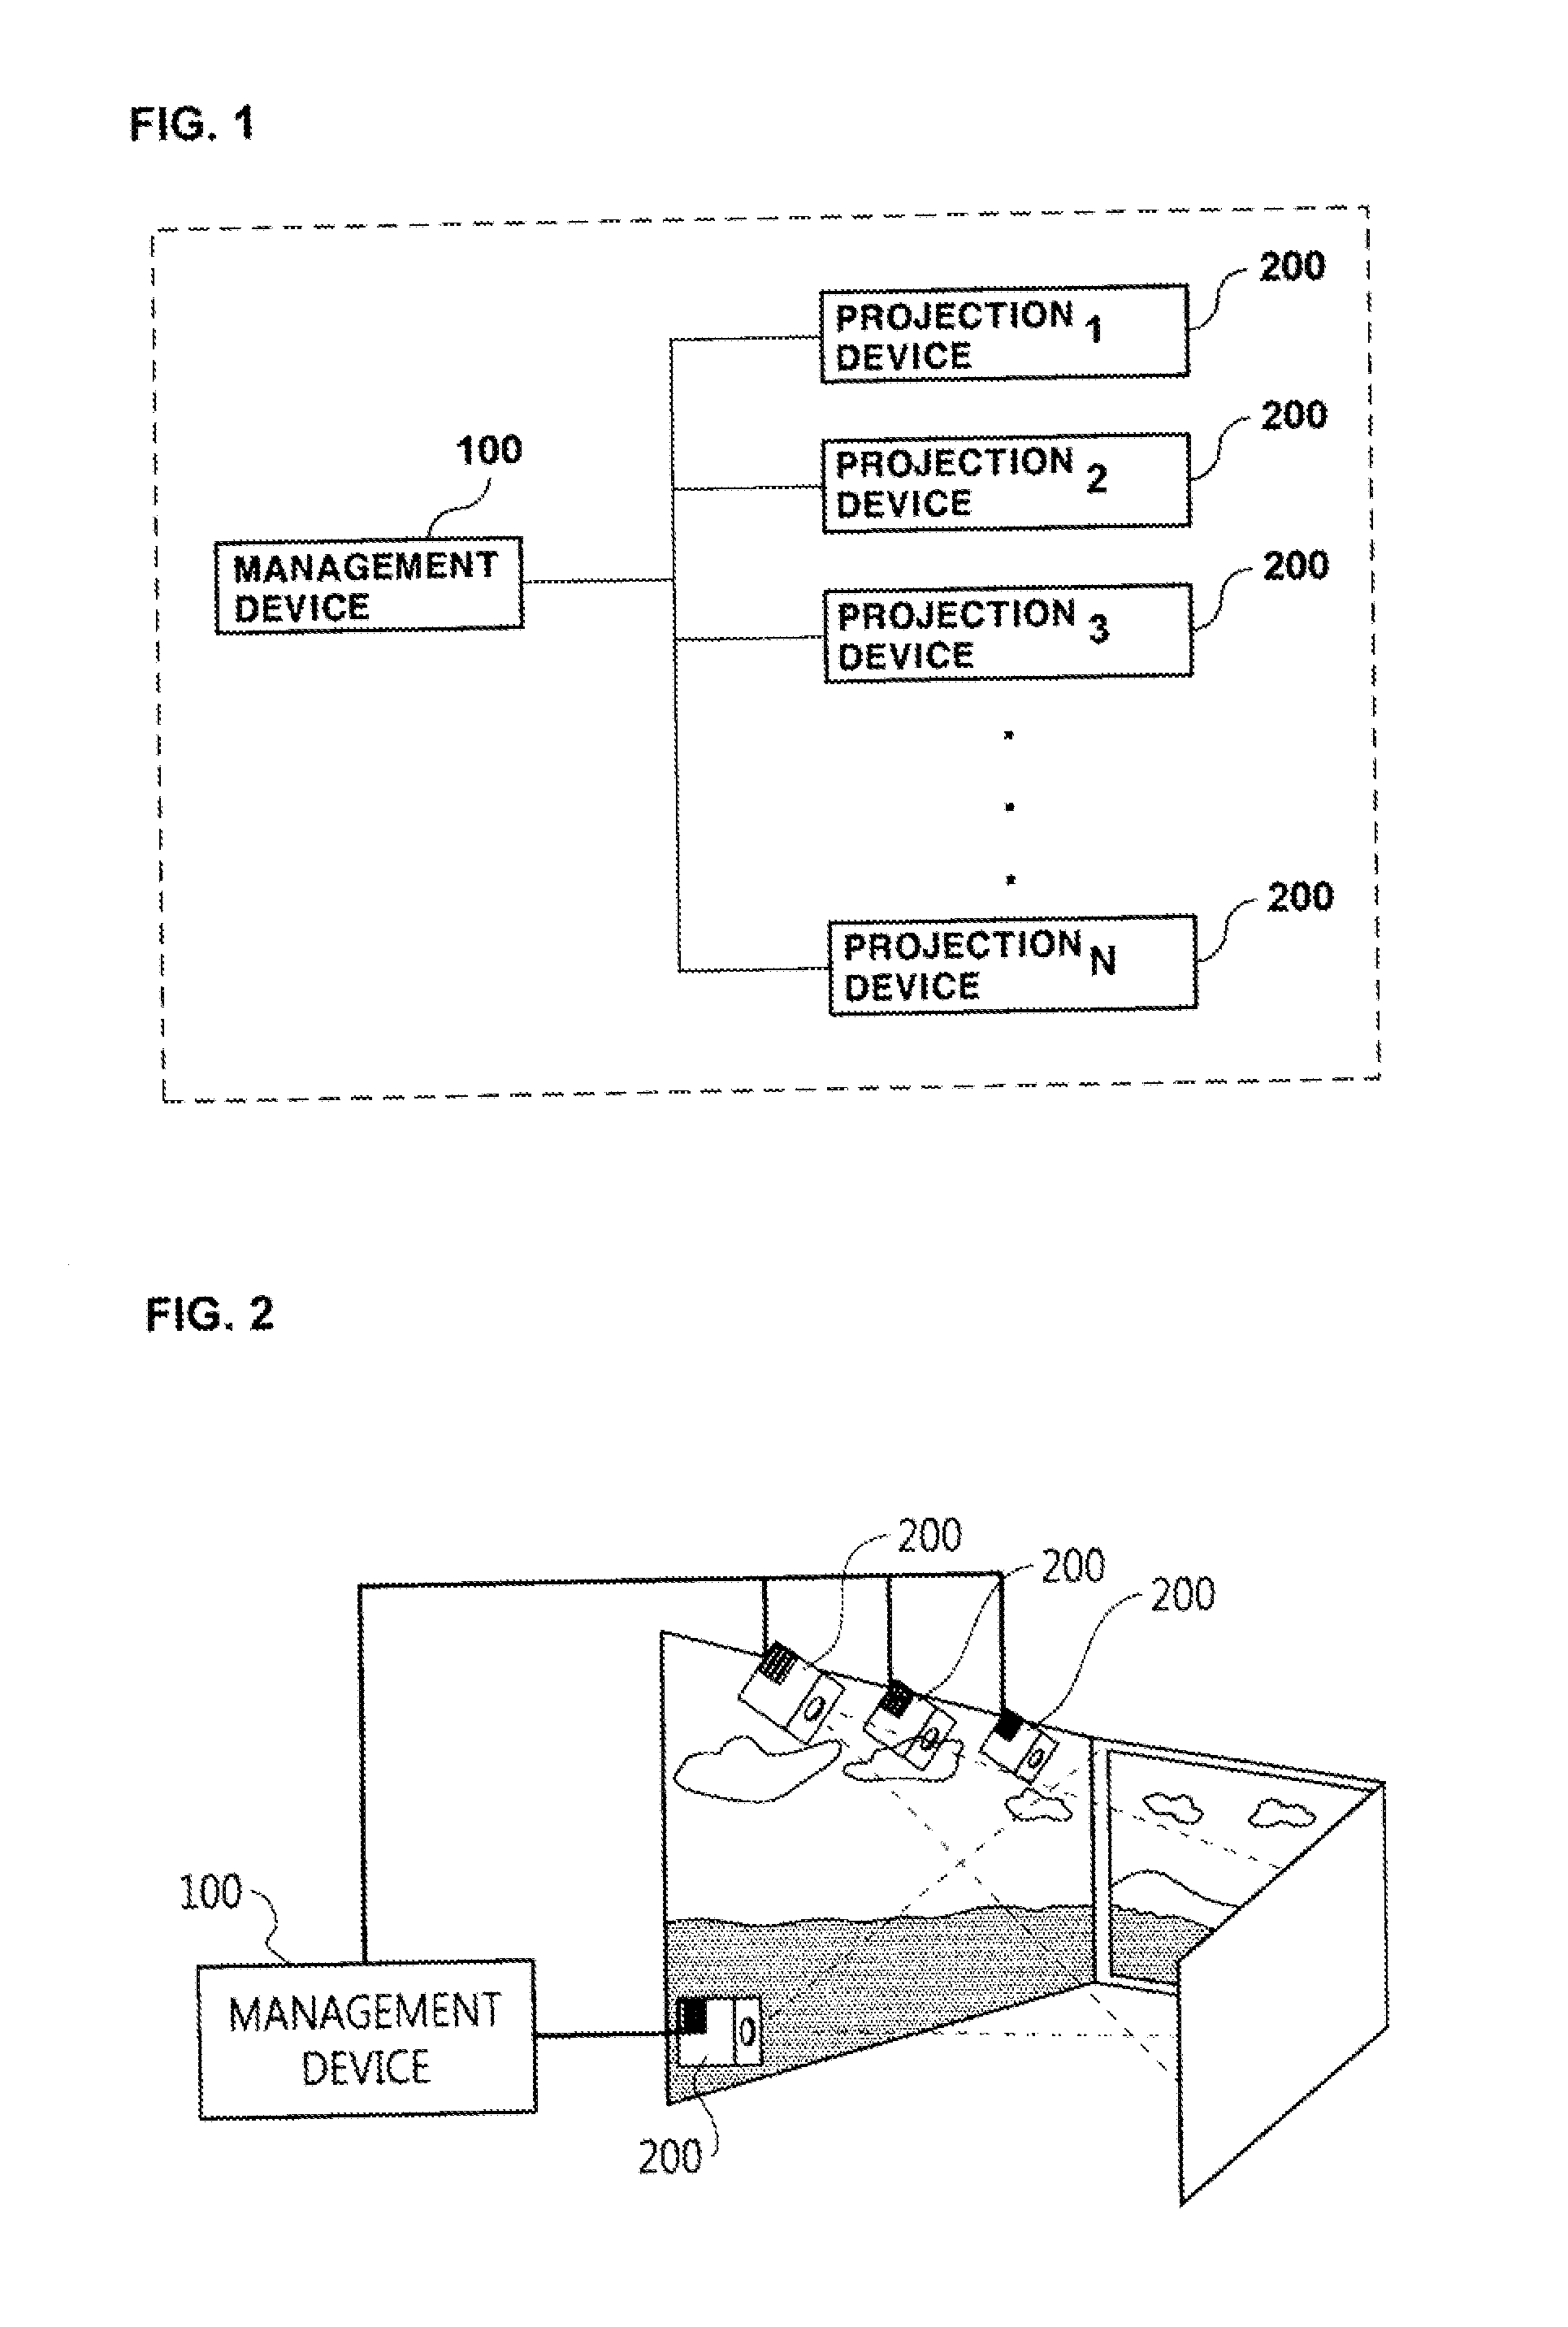 Projection device management system